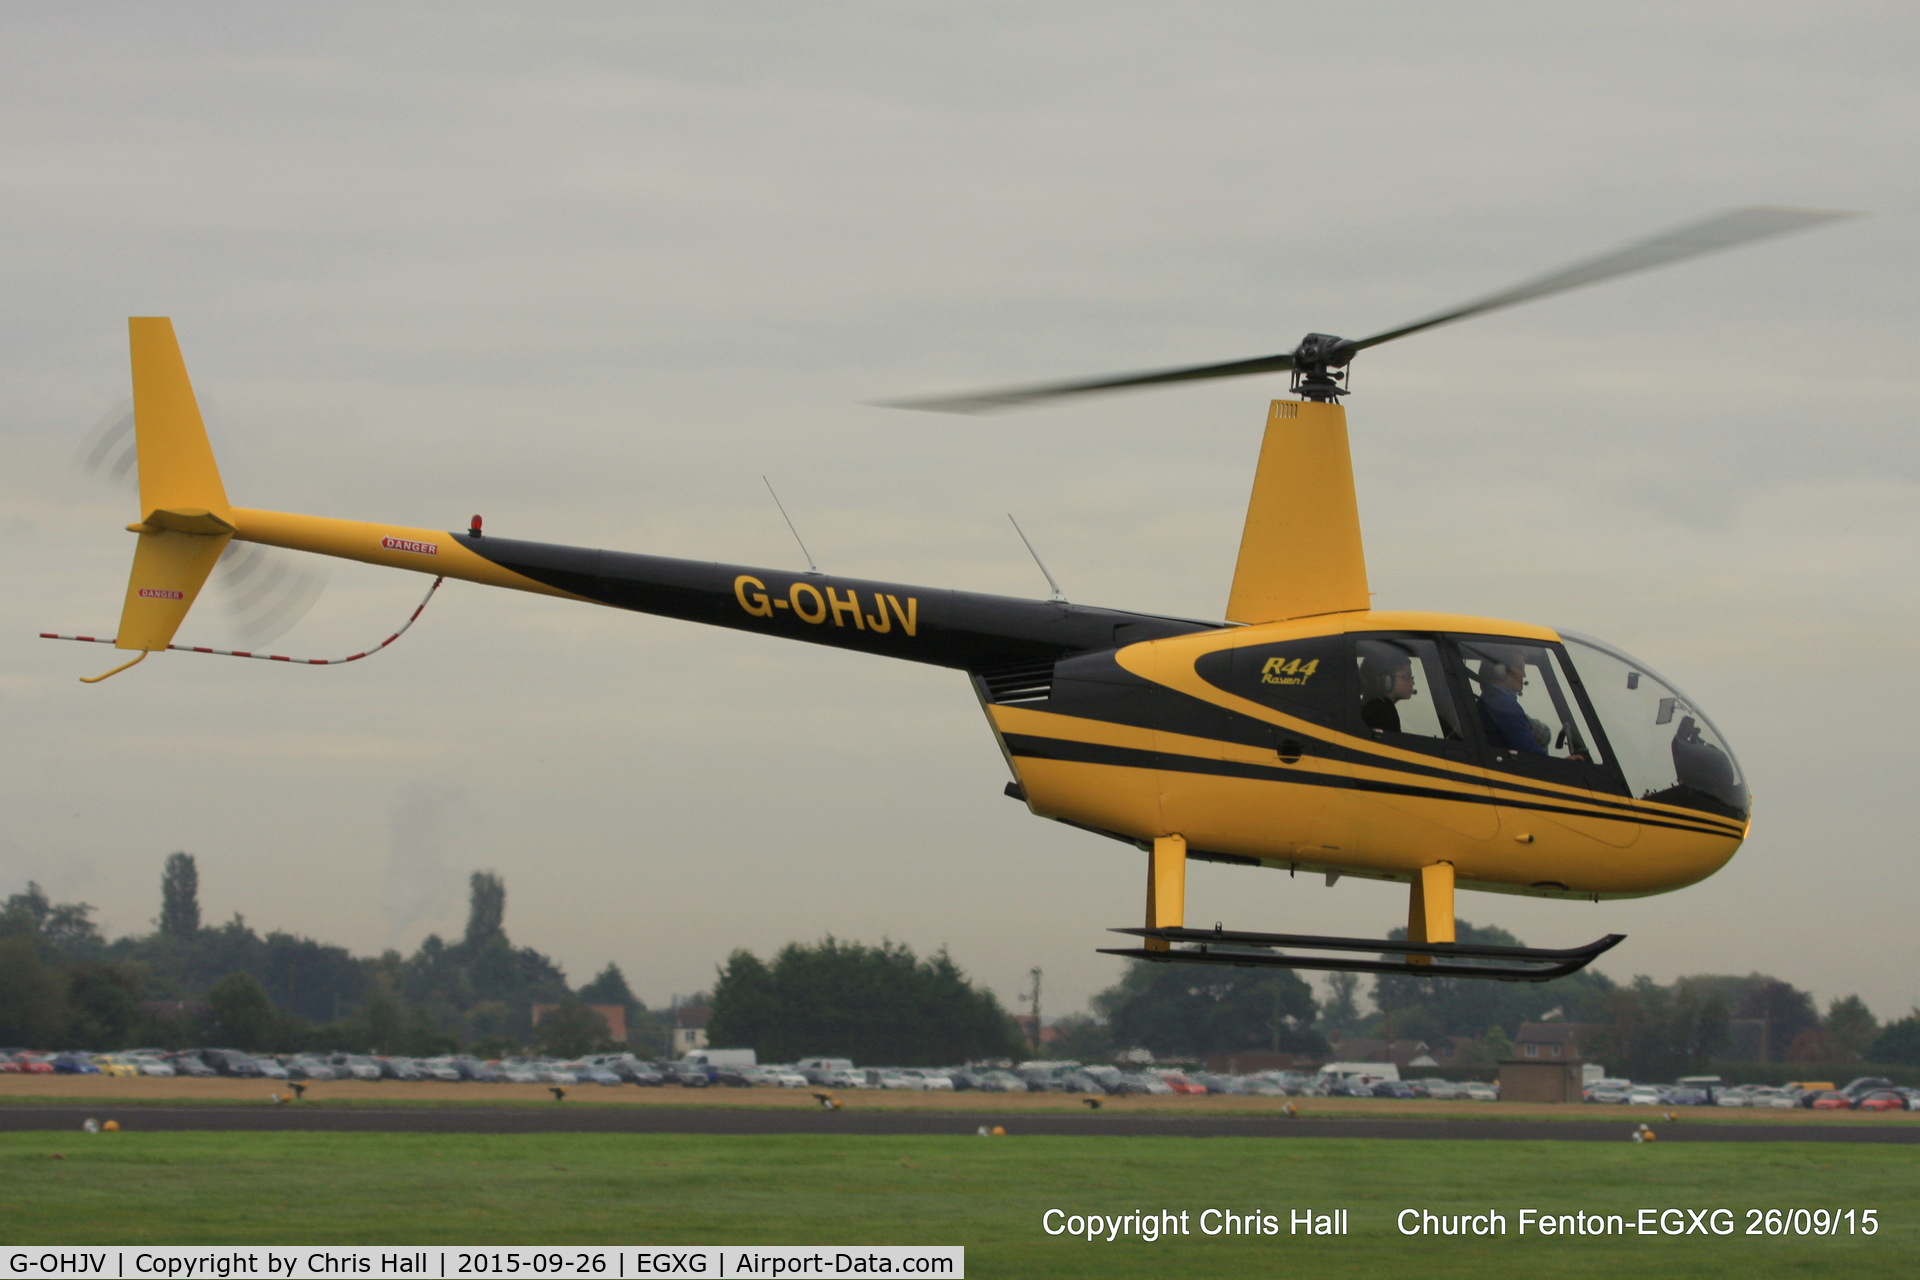 G-OHJV, 2007 Robinson R44 Raven I C/N 1722, at the Yorkshire Airshow